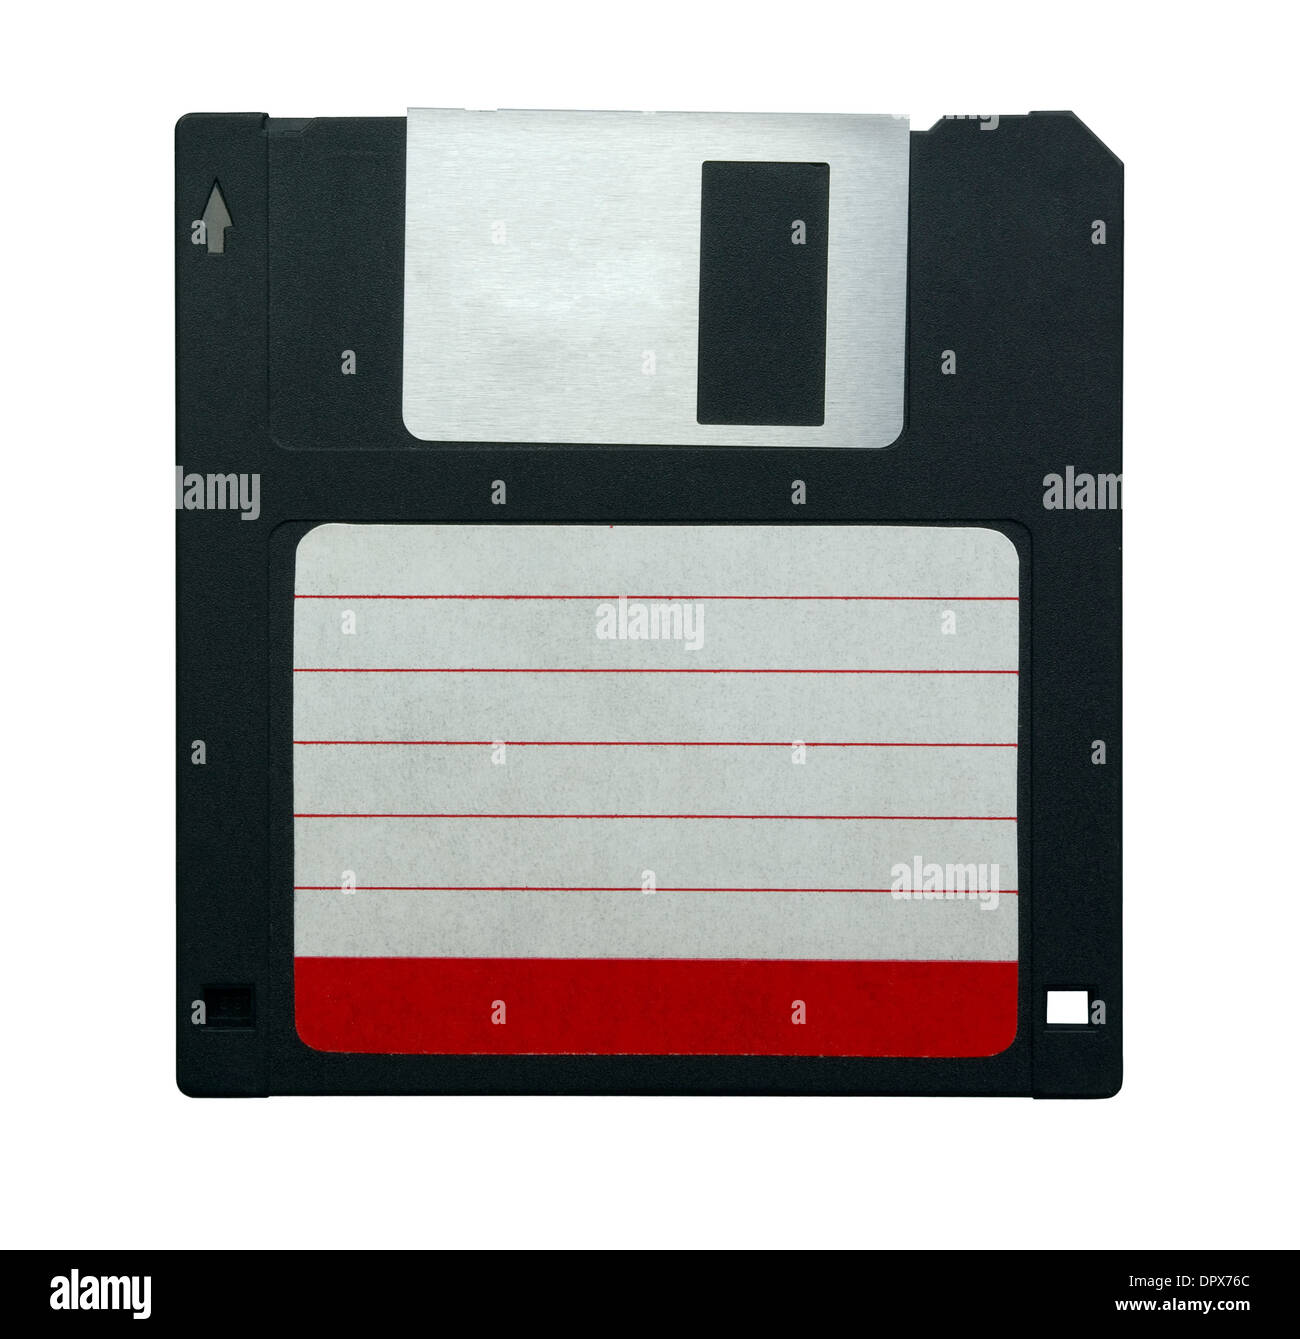 Black 3.5' floppy disk with empty label isolated on white Stock Photo